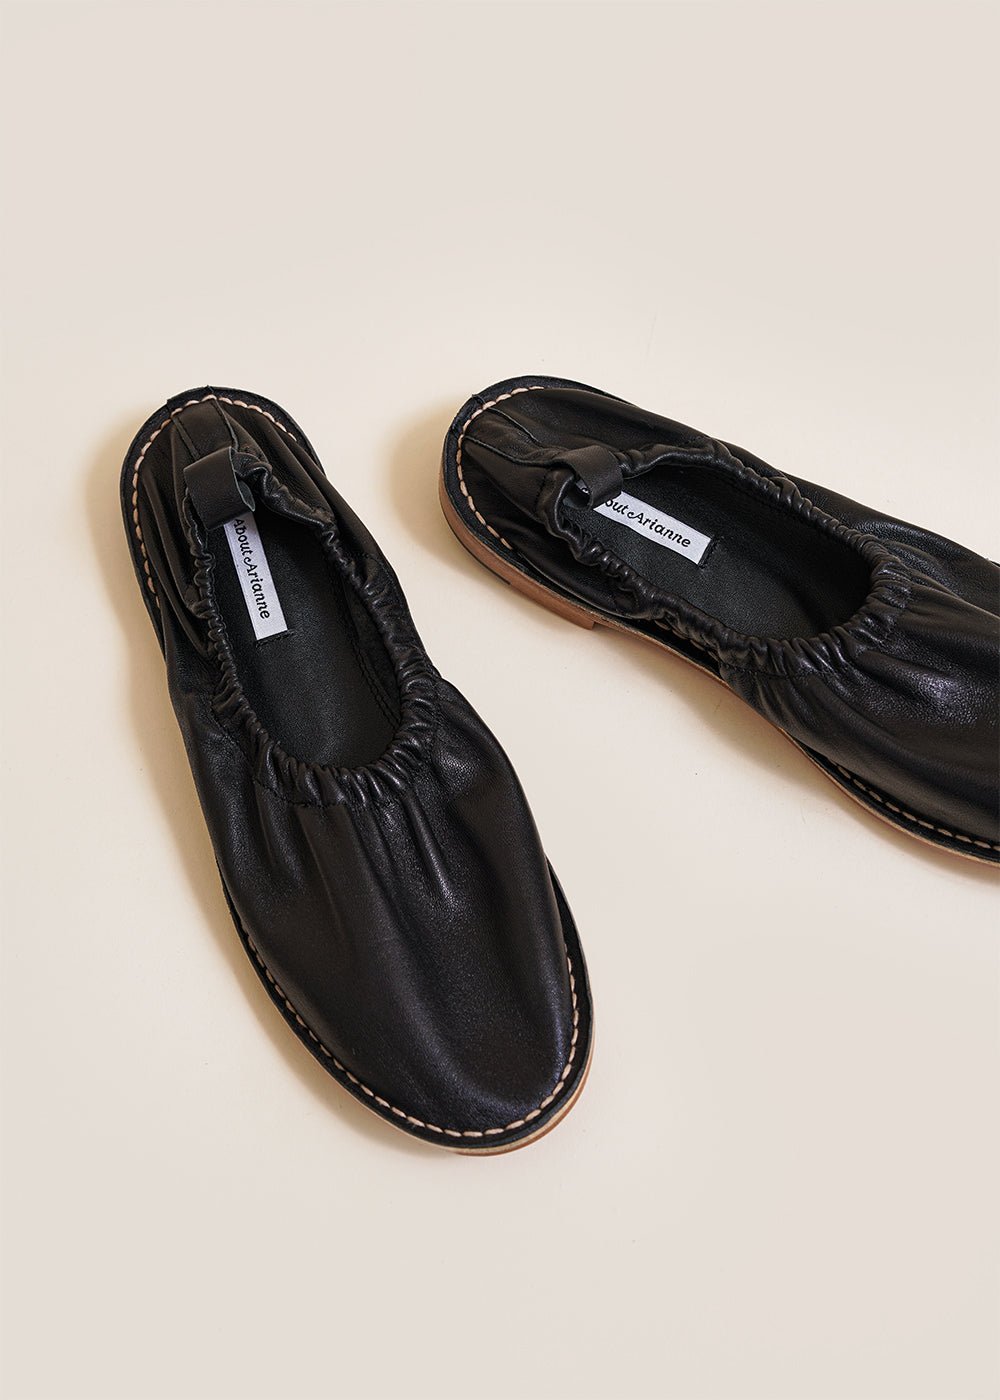 About Arianne Black Moi Glove Flats - New Classics Studios Sustainable Ethical Fashion Canada